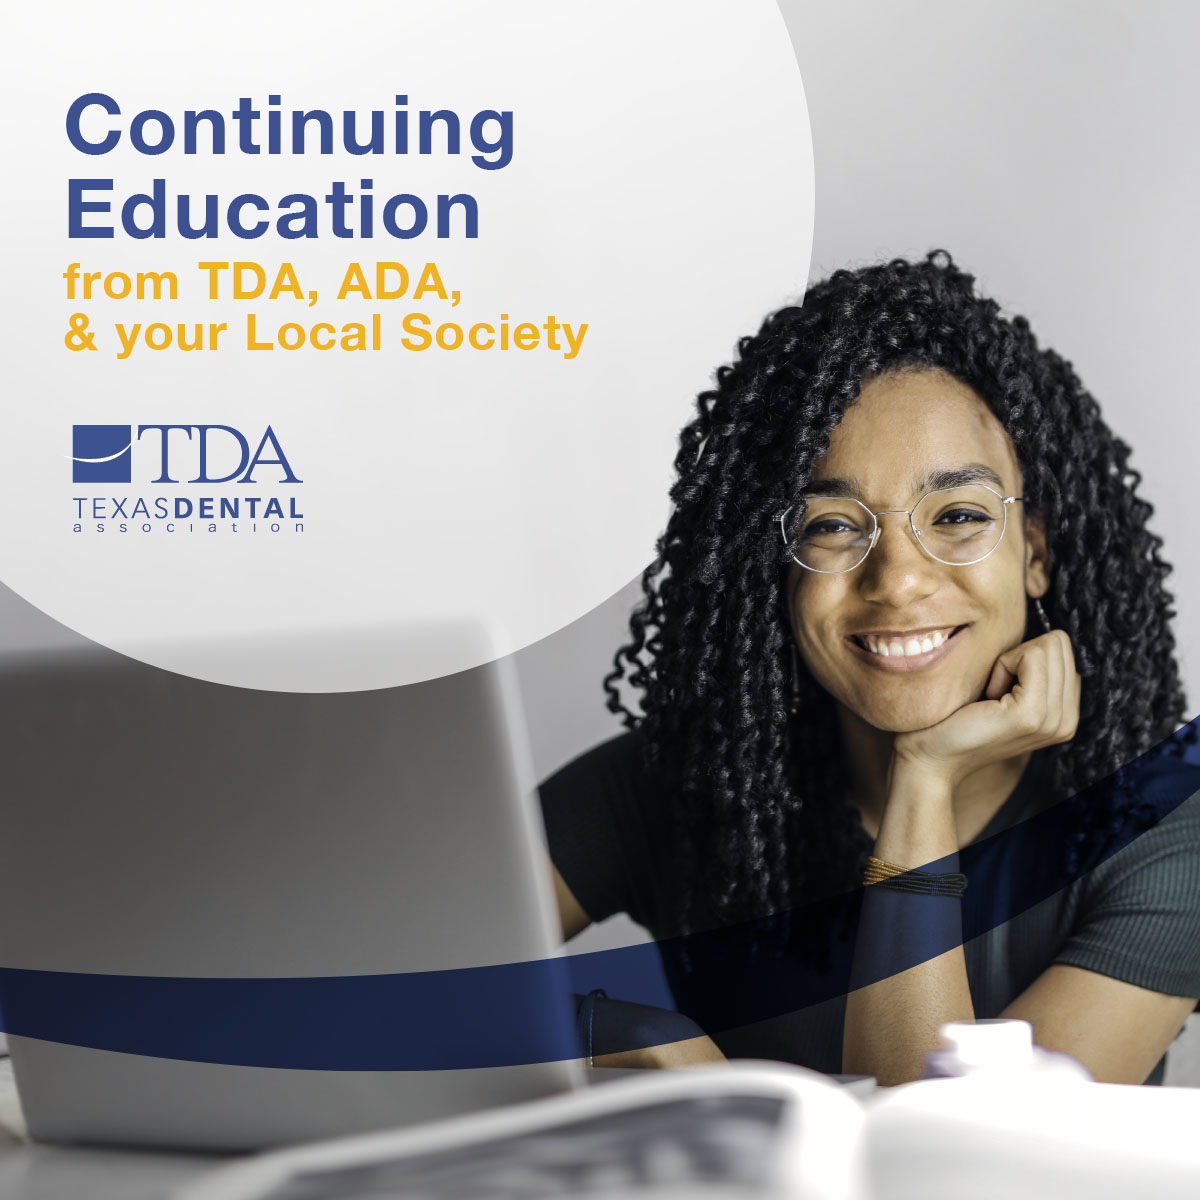 Continuing Education from TDA, ADA, & your Local Society